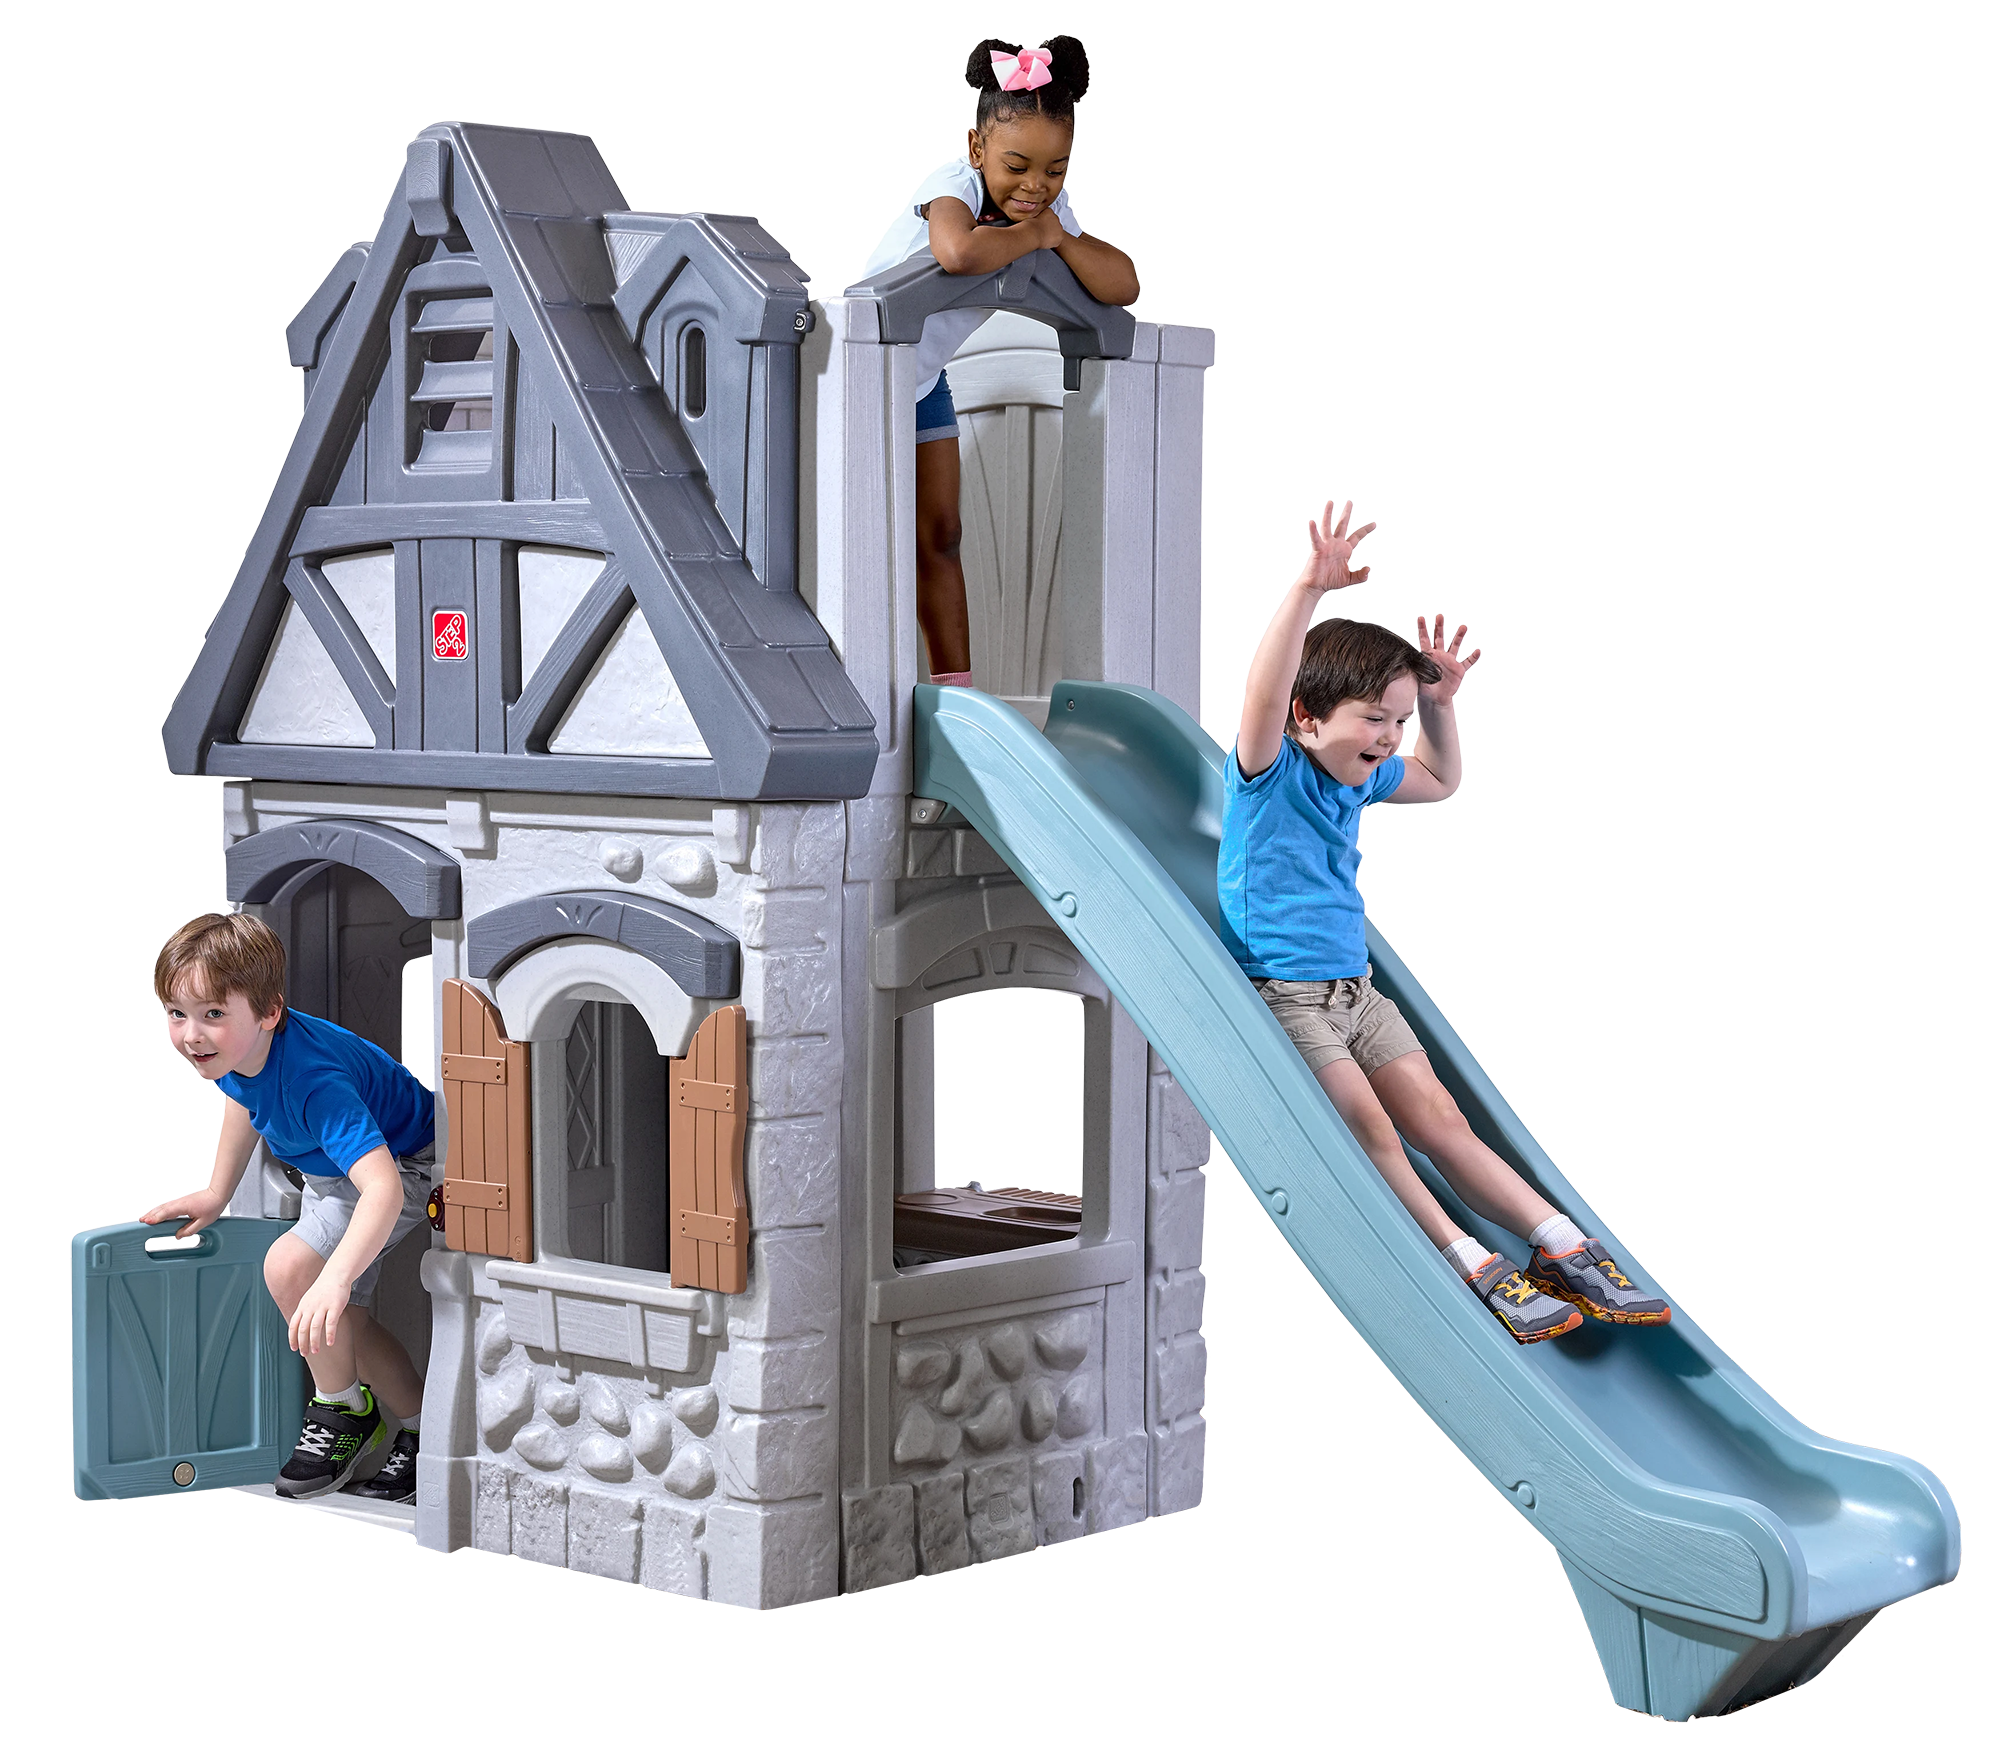 Enchanting Adventures 2-Story Playhouse and Slide